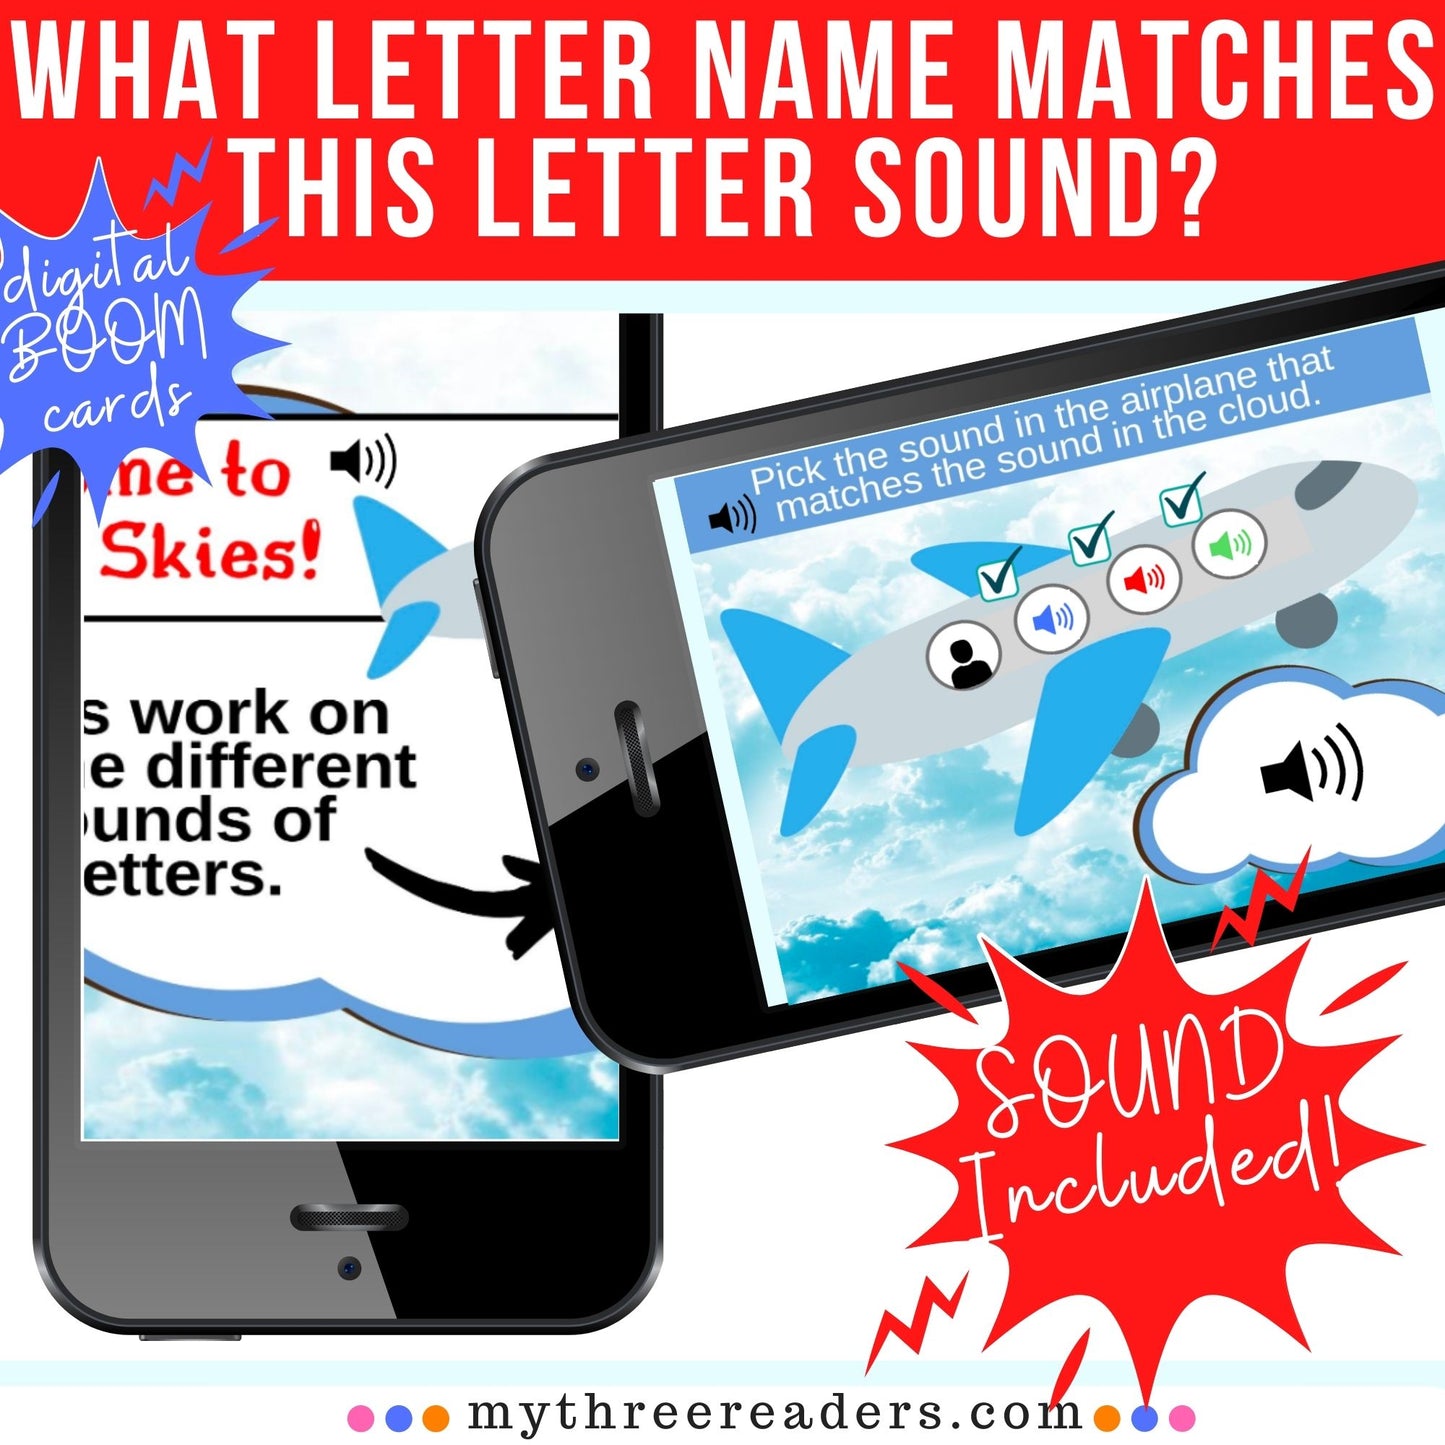 Match the Letter's SOUND to the Letter's NAME